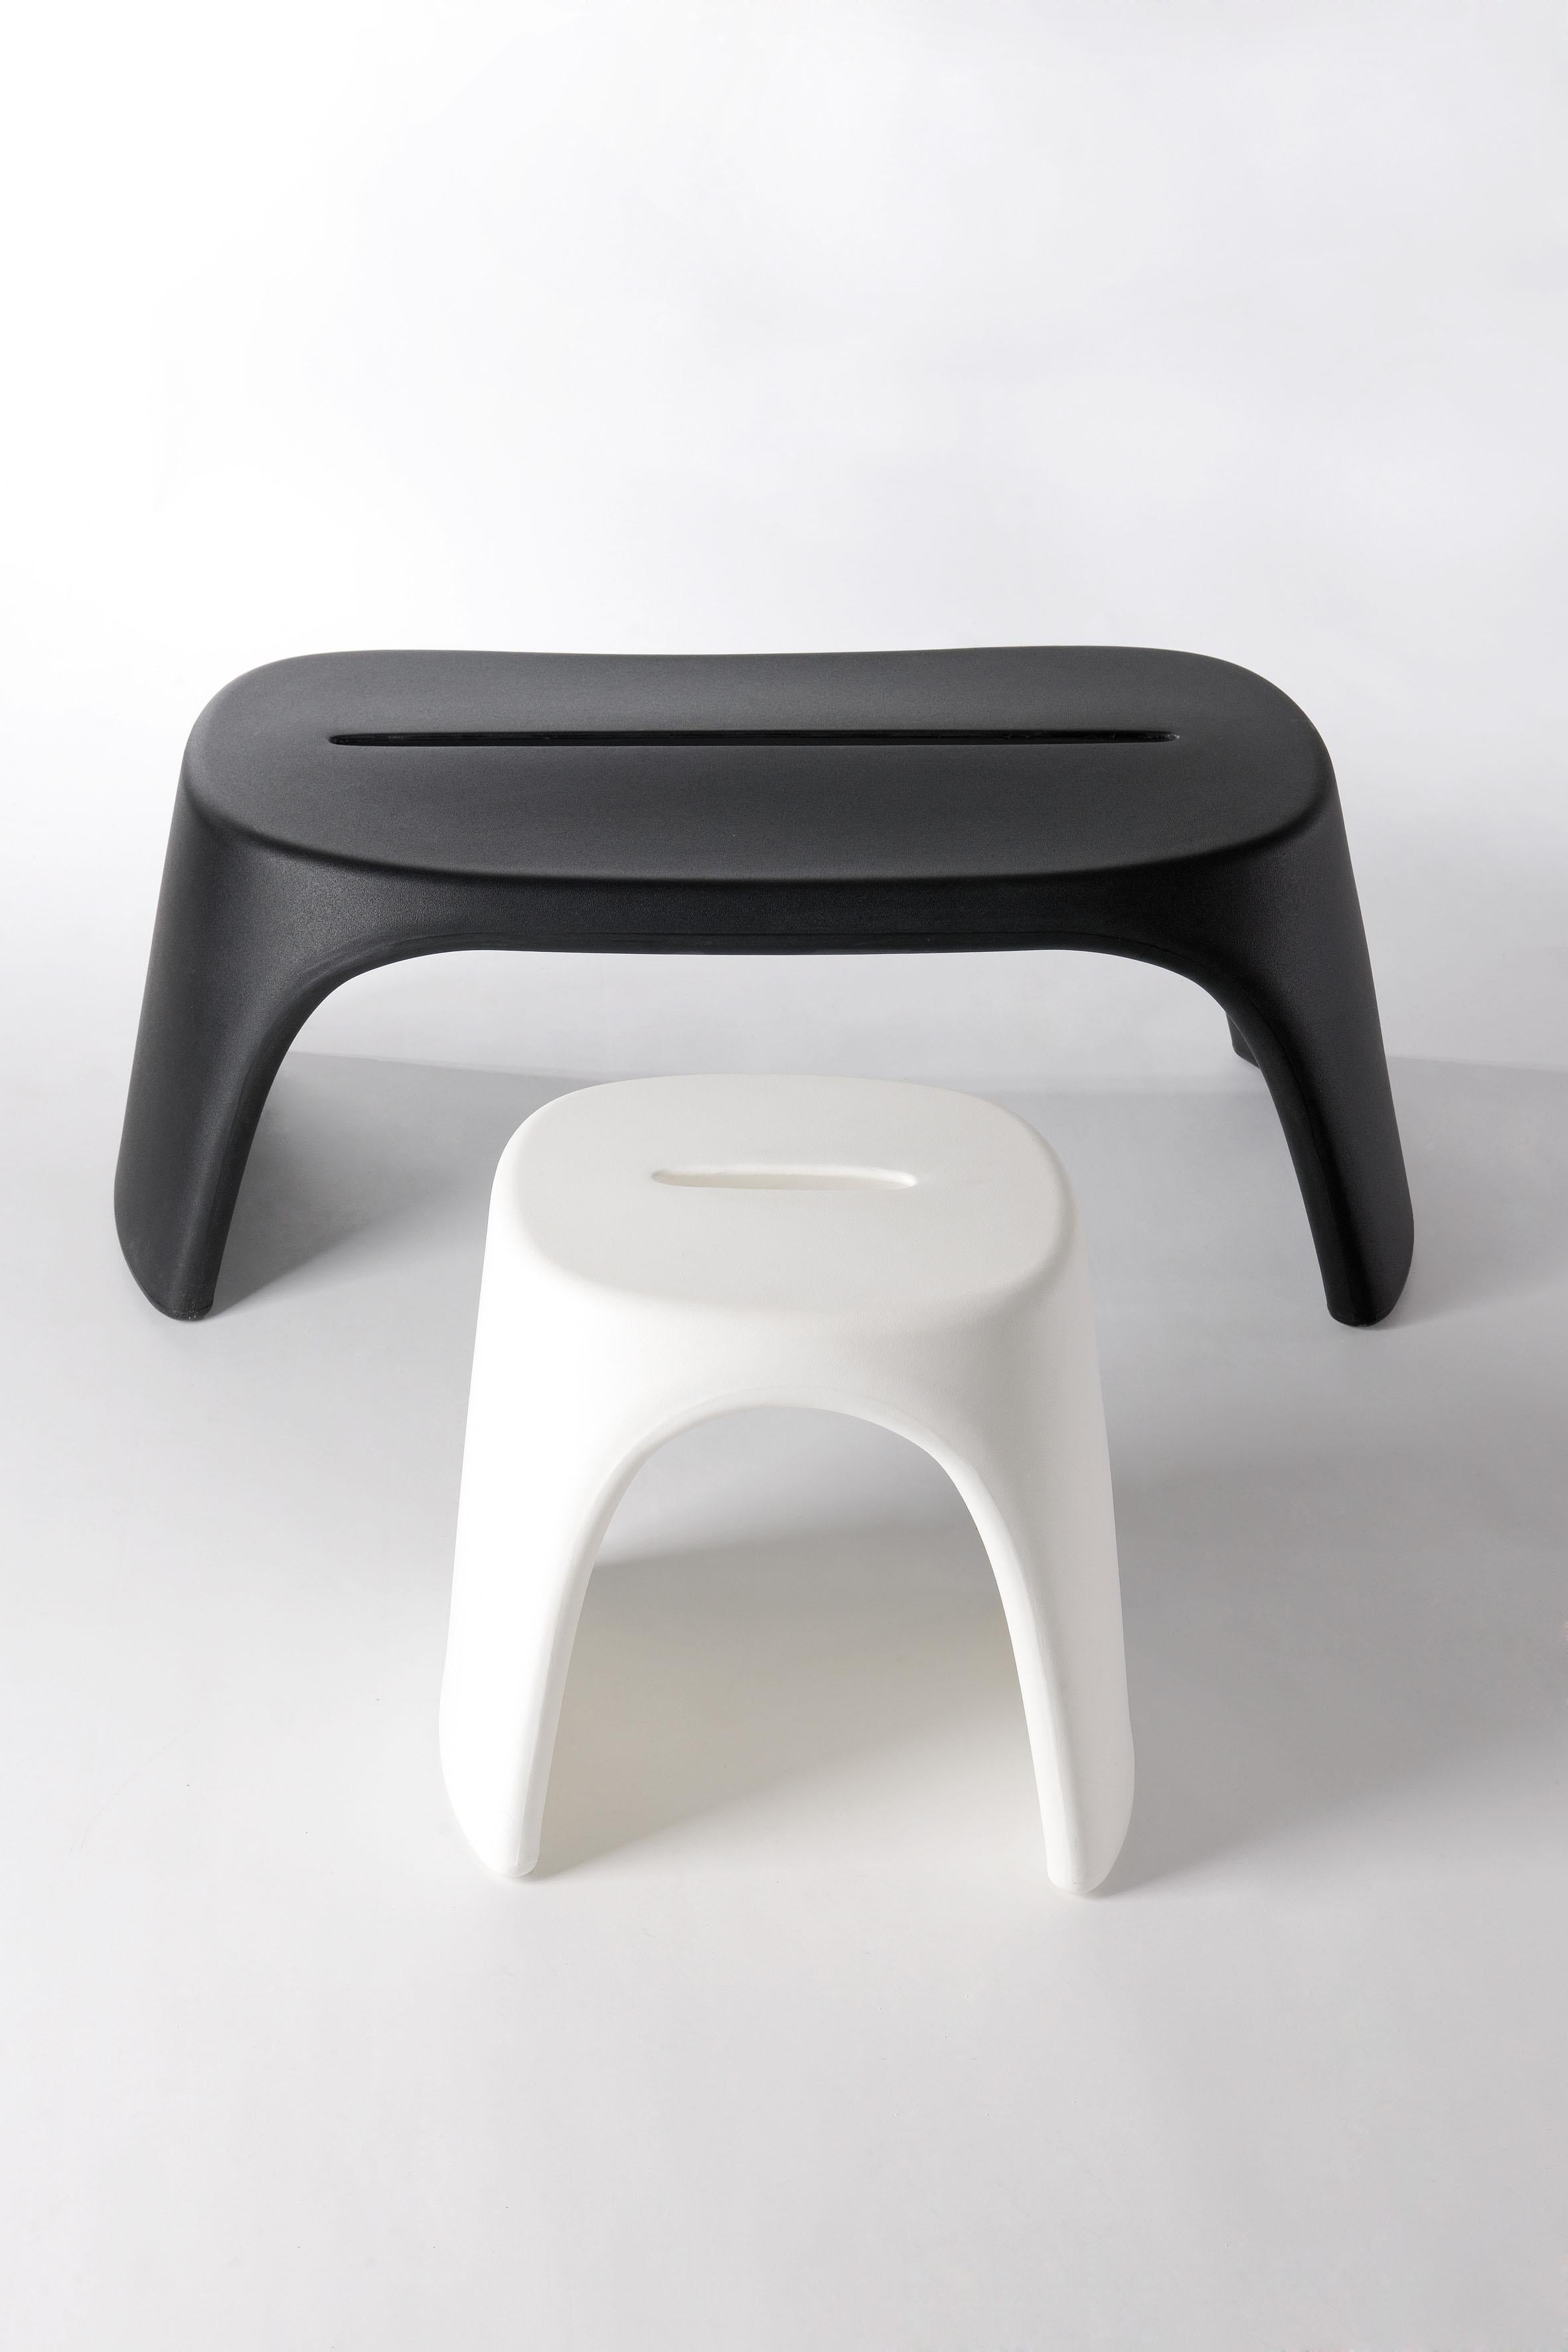 Amélie Sgabello is a product that belongs to Amélie collection. The stool is stackable and it has got fluid and essential design, as the whole Amélie collection. The stool is a beautiful design product but it is also a functional object, which can